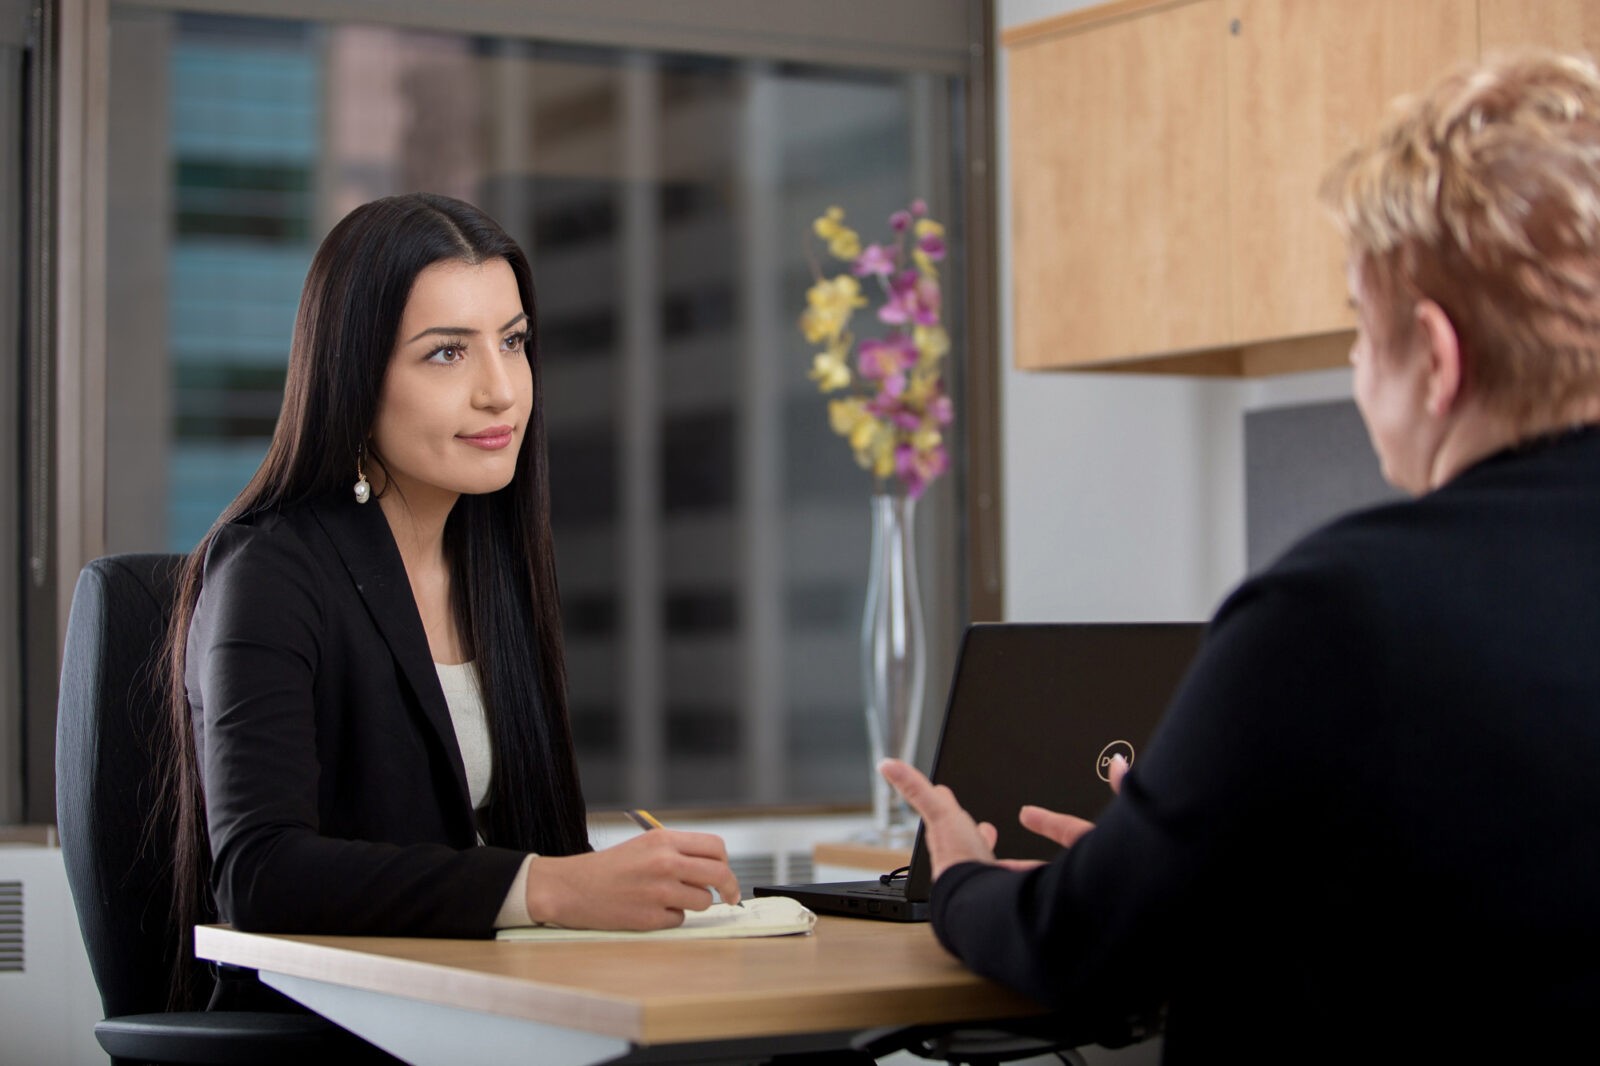 A young businesswoman talks to a client.